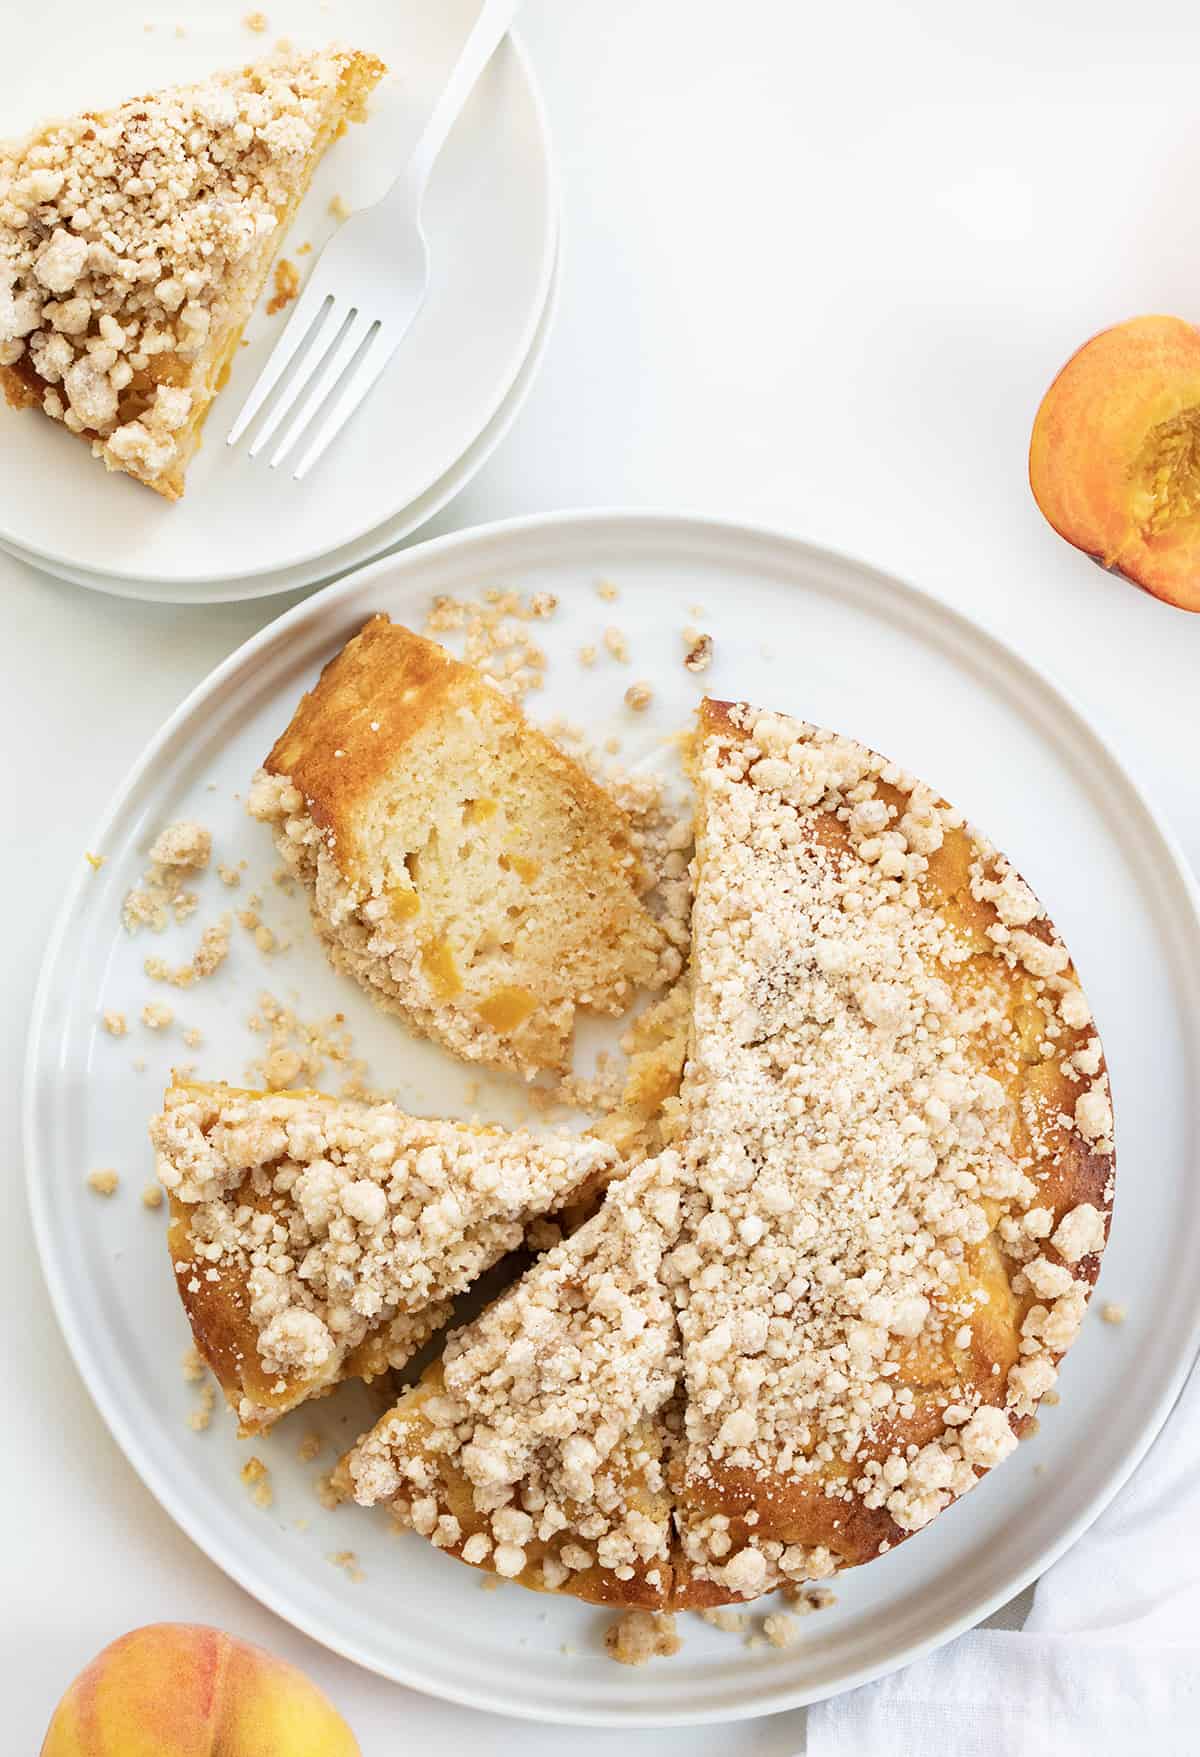 Whole Peach Cake on White Platter With Half of the Pieces Cut and One on its Side.